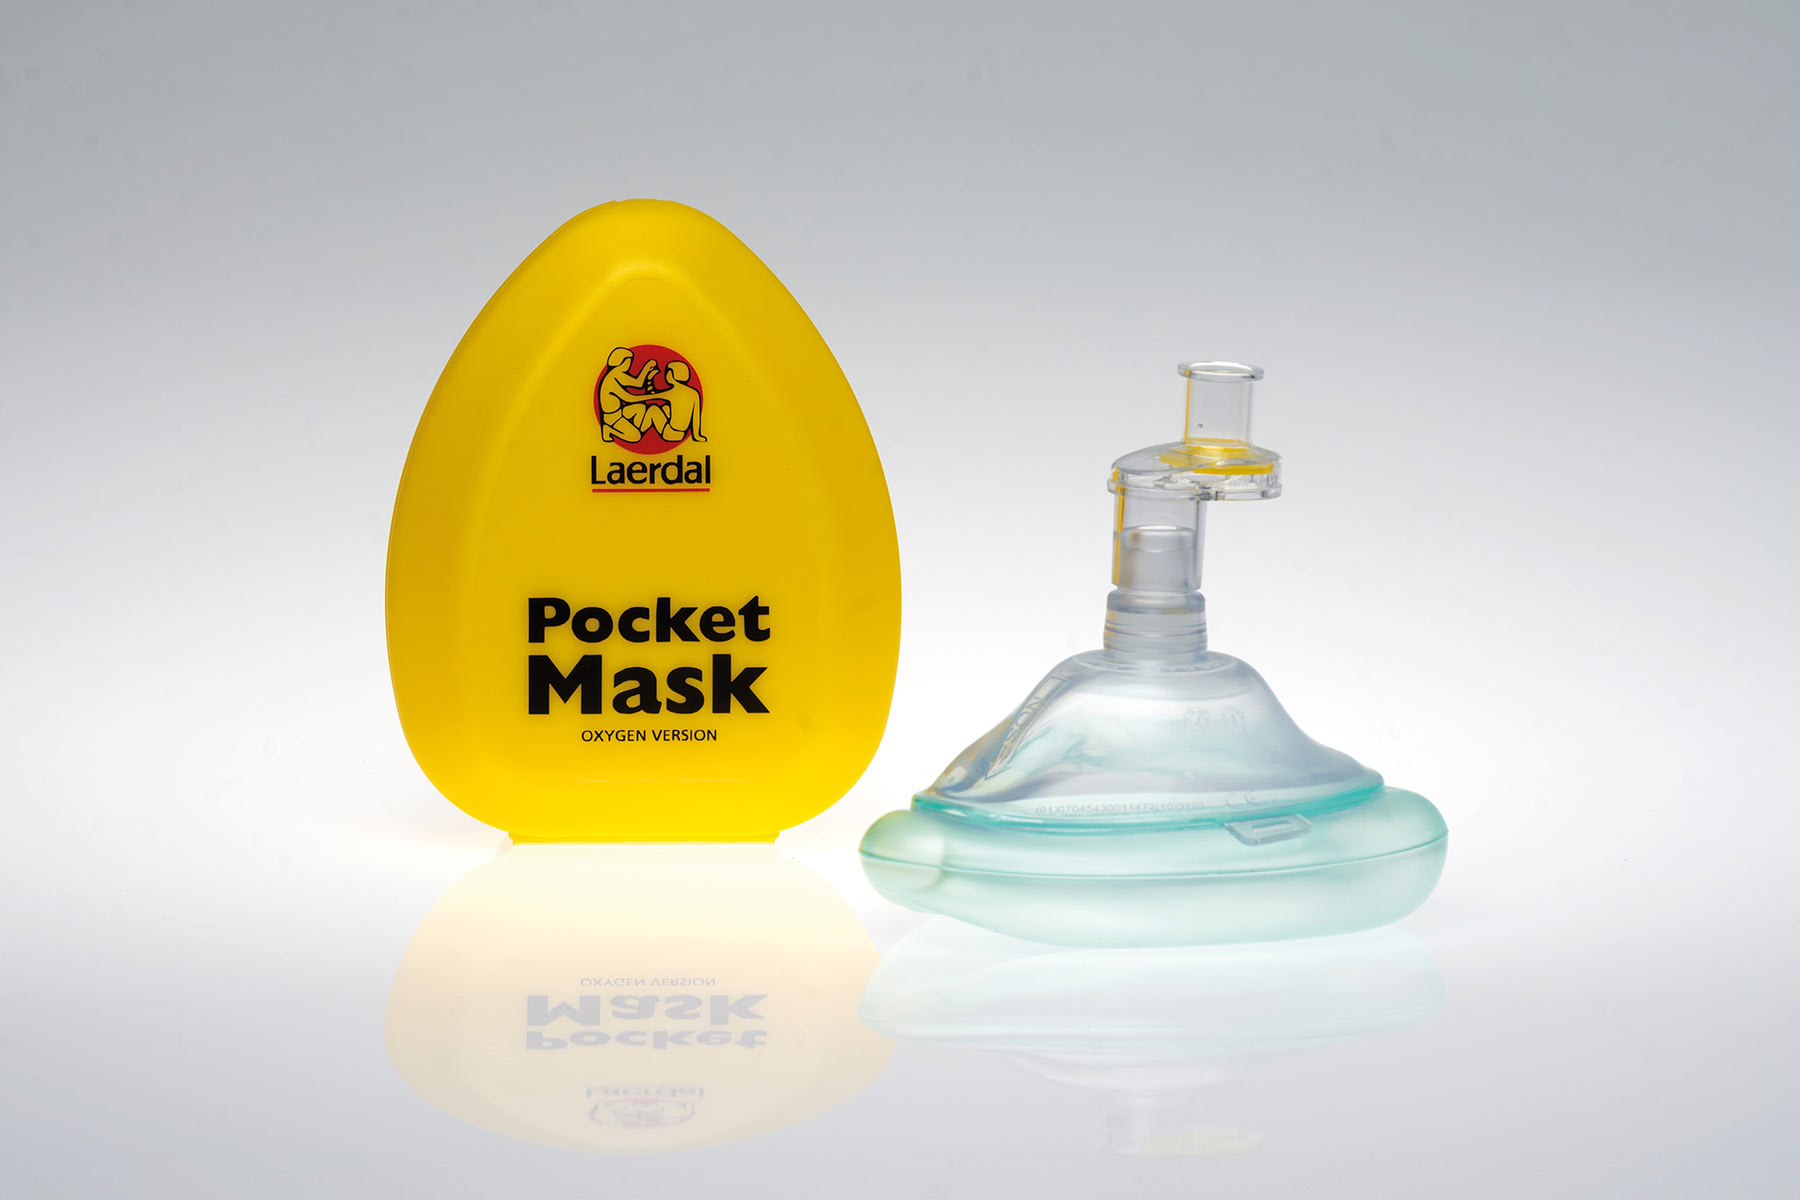 Adult/Child CPR Mask with O2 Inlet & Infant CPR Mask